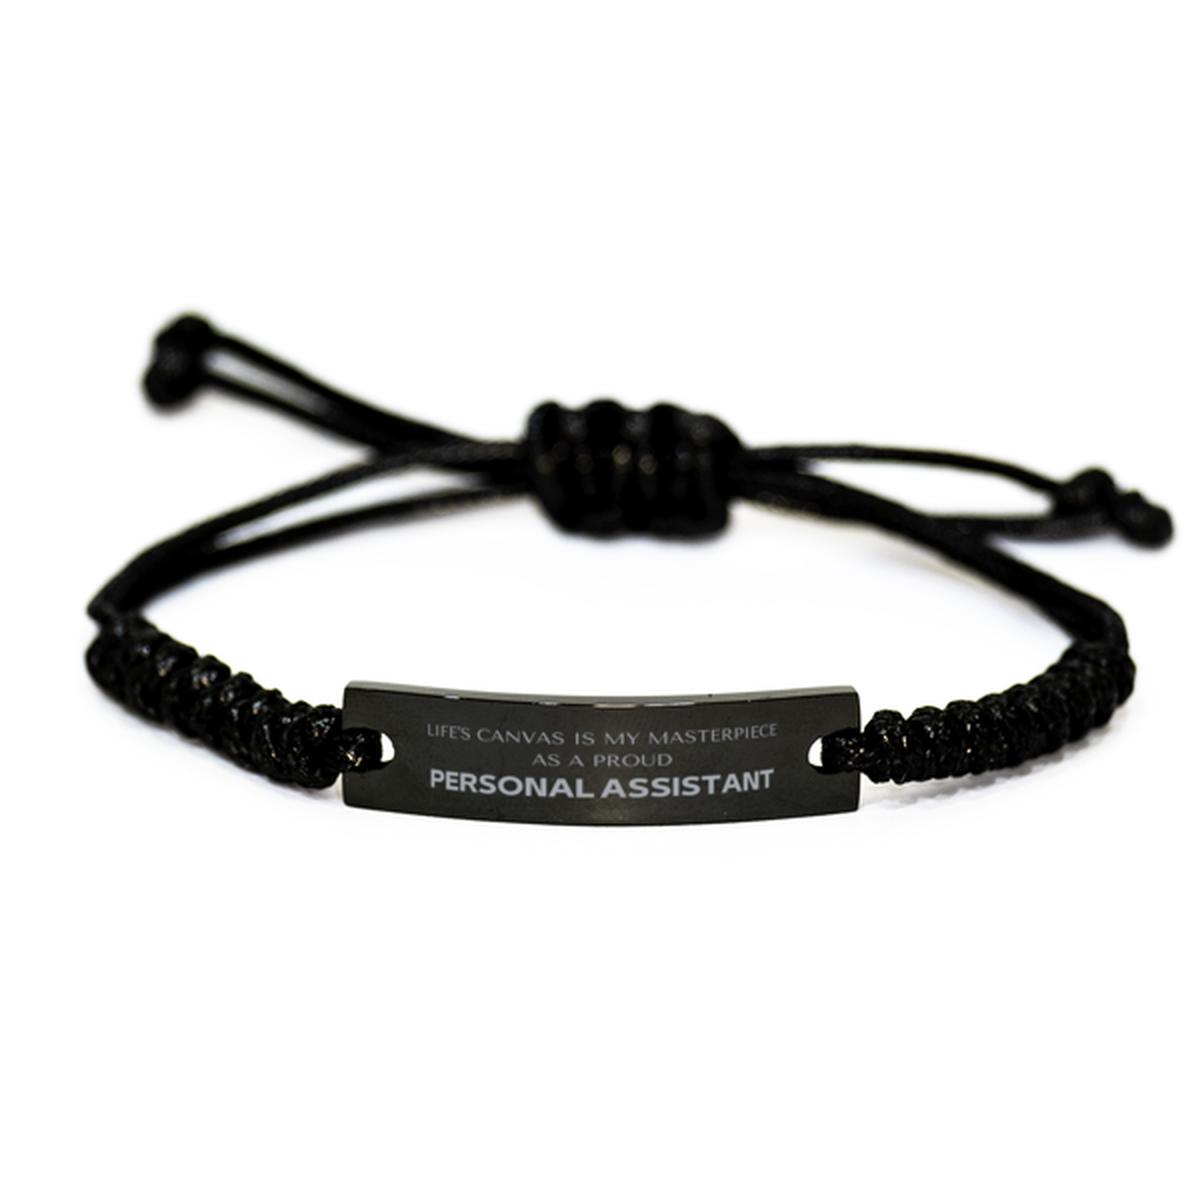 Proud Personal Assistant Gifts, Life's canvas is my masterpiece, Epic Birthday Christmas Unique Black Rope Bracelet For Personal Assistant, Coworkers, Men, Women, Friends